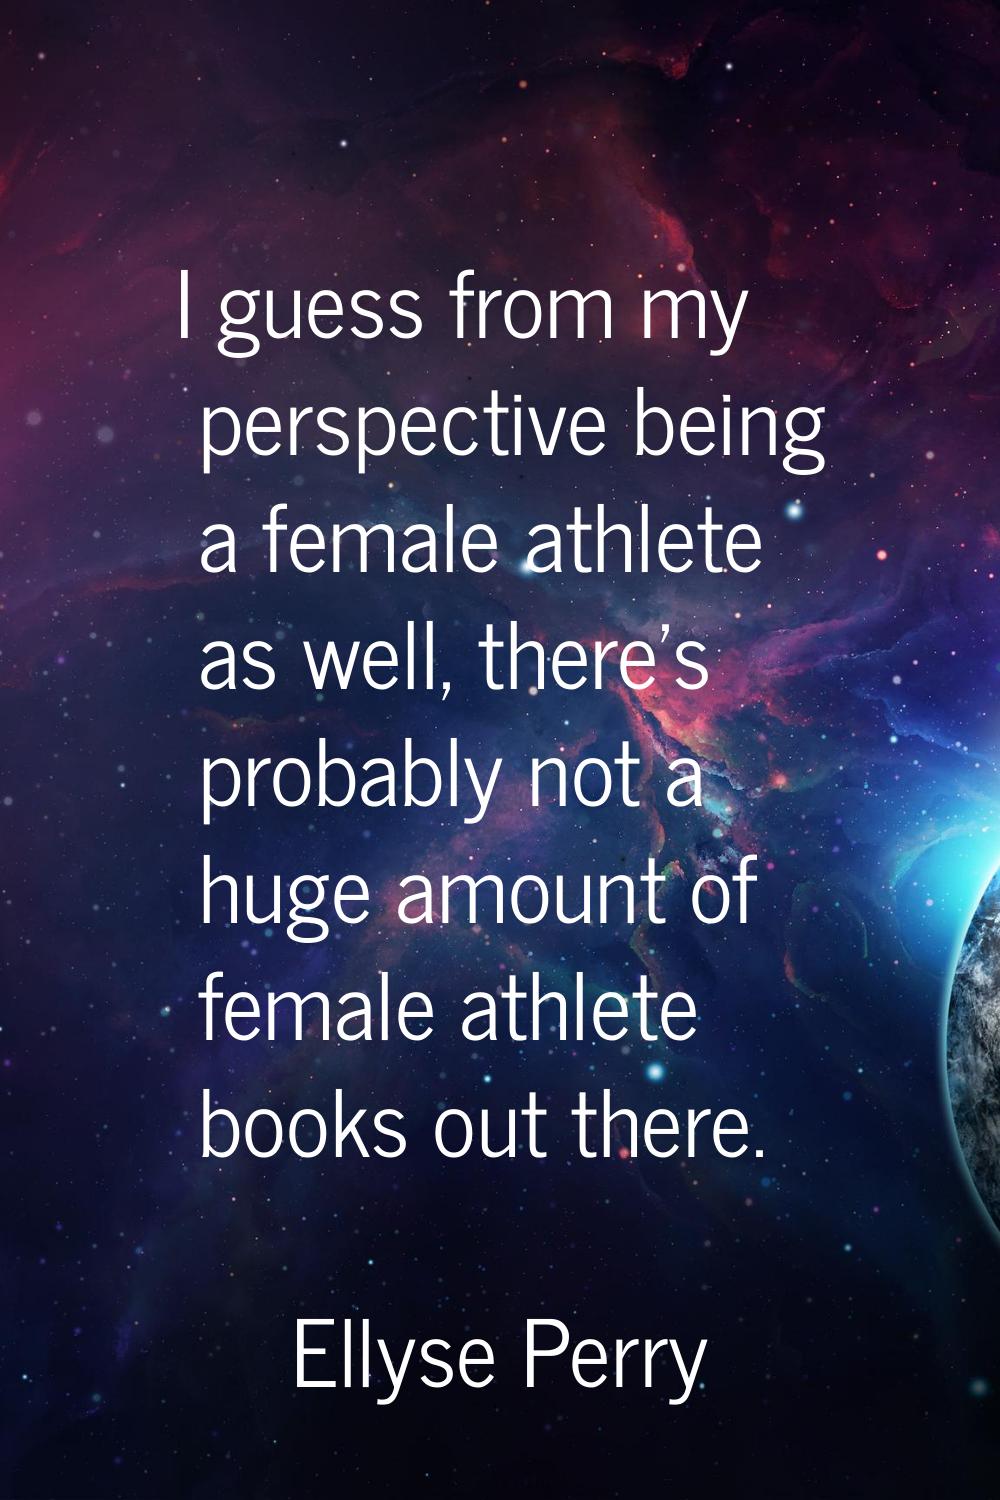 I guess from my perspective being a female athlete as well, there's probably not a huge amount of f